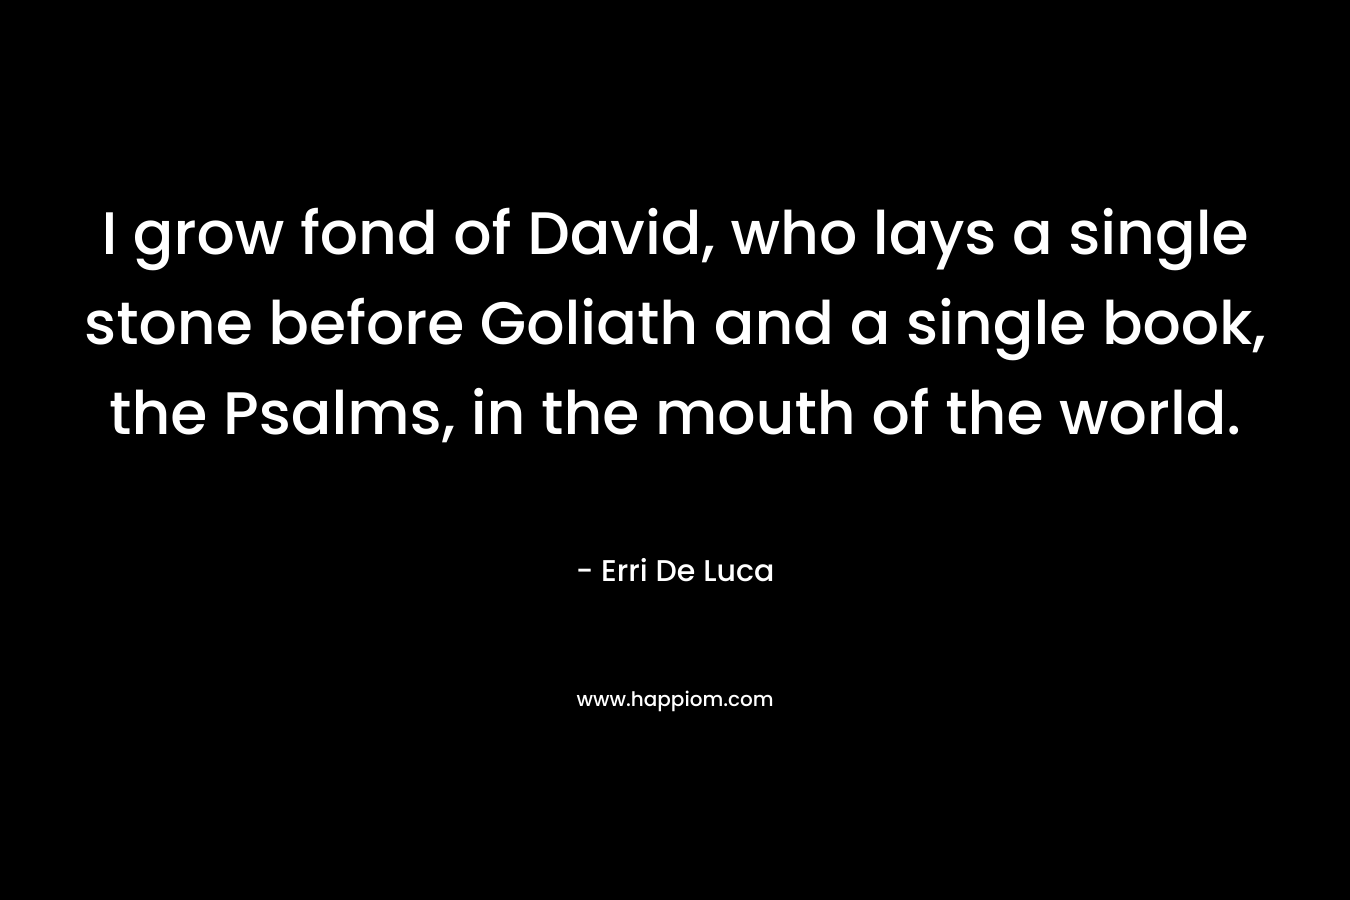 I grow fond of David, who lays a single stone before Goliath and a single book, the Psalms, in the mouth of the world.